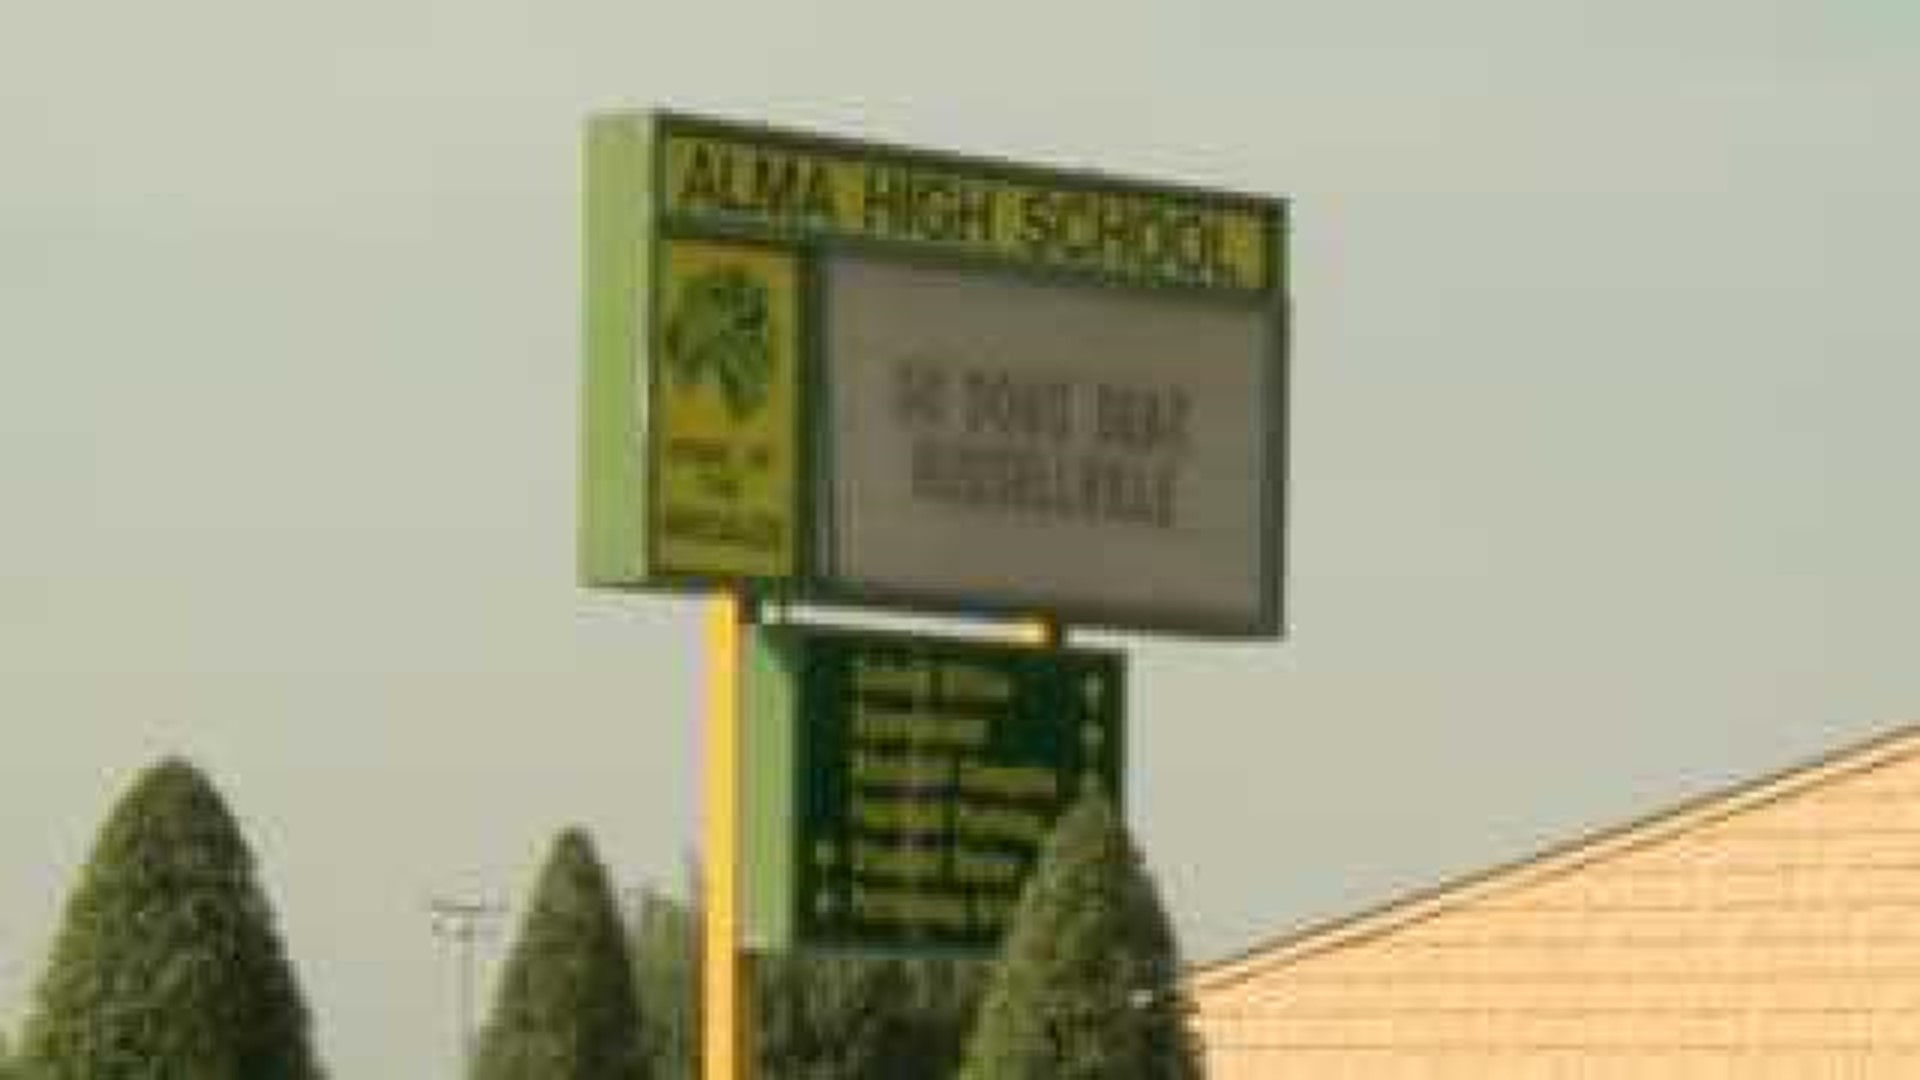 Low Enrollment Could Mean Less Funding for Alma Schools